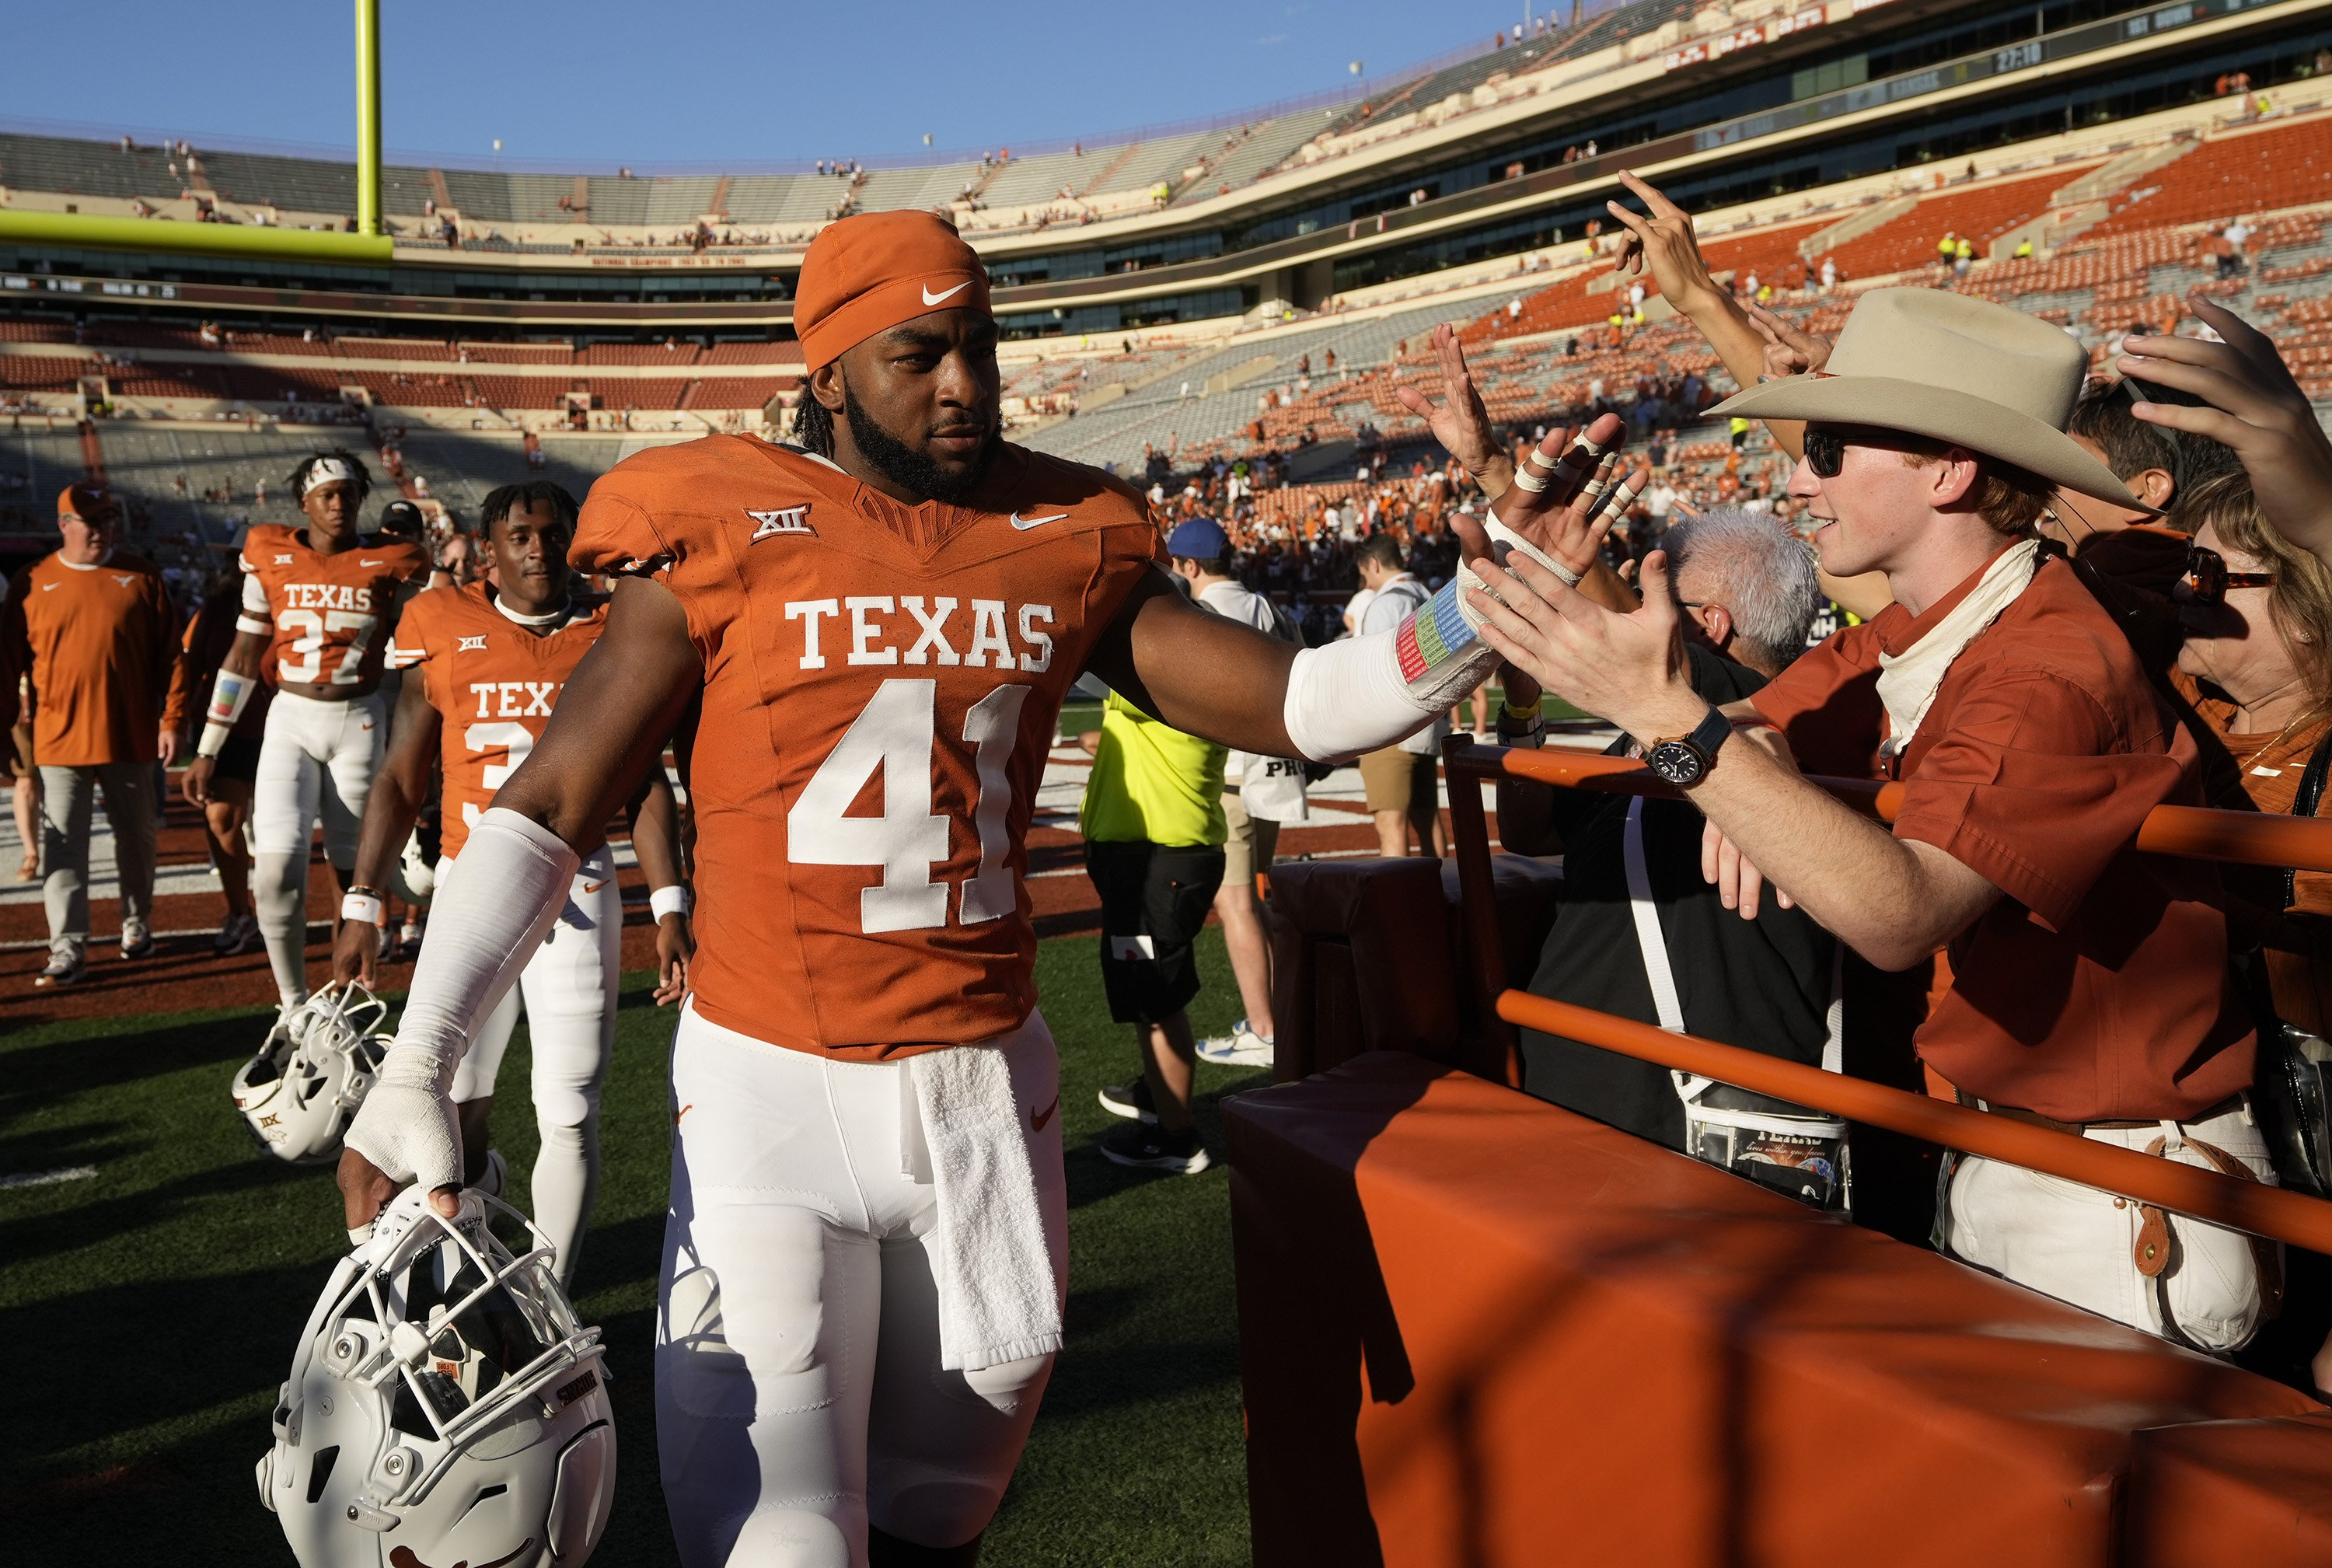 Will a Big 12 title get Texas into the College Football Playoff?